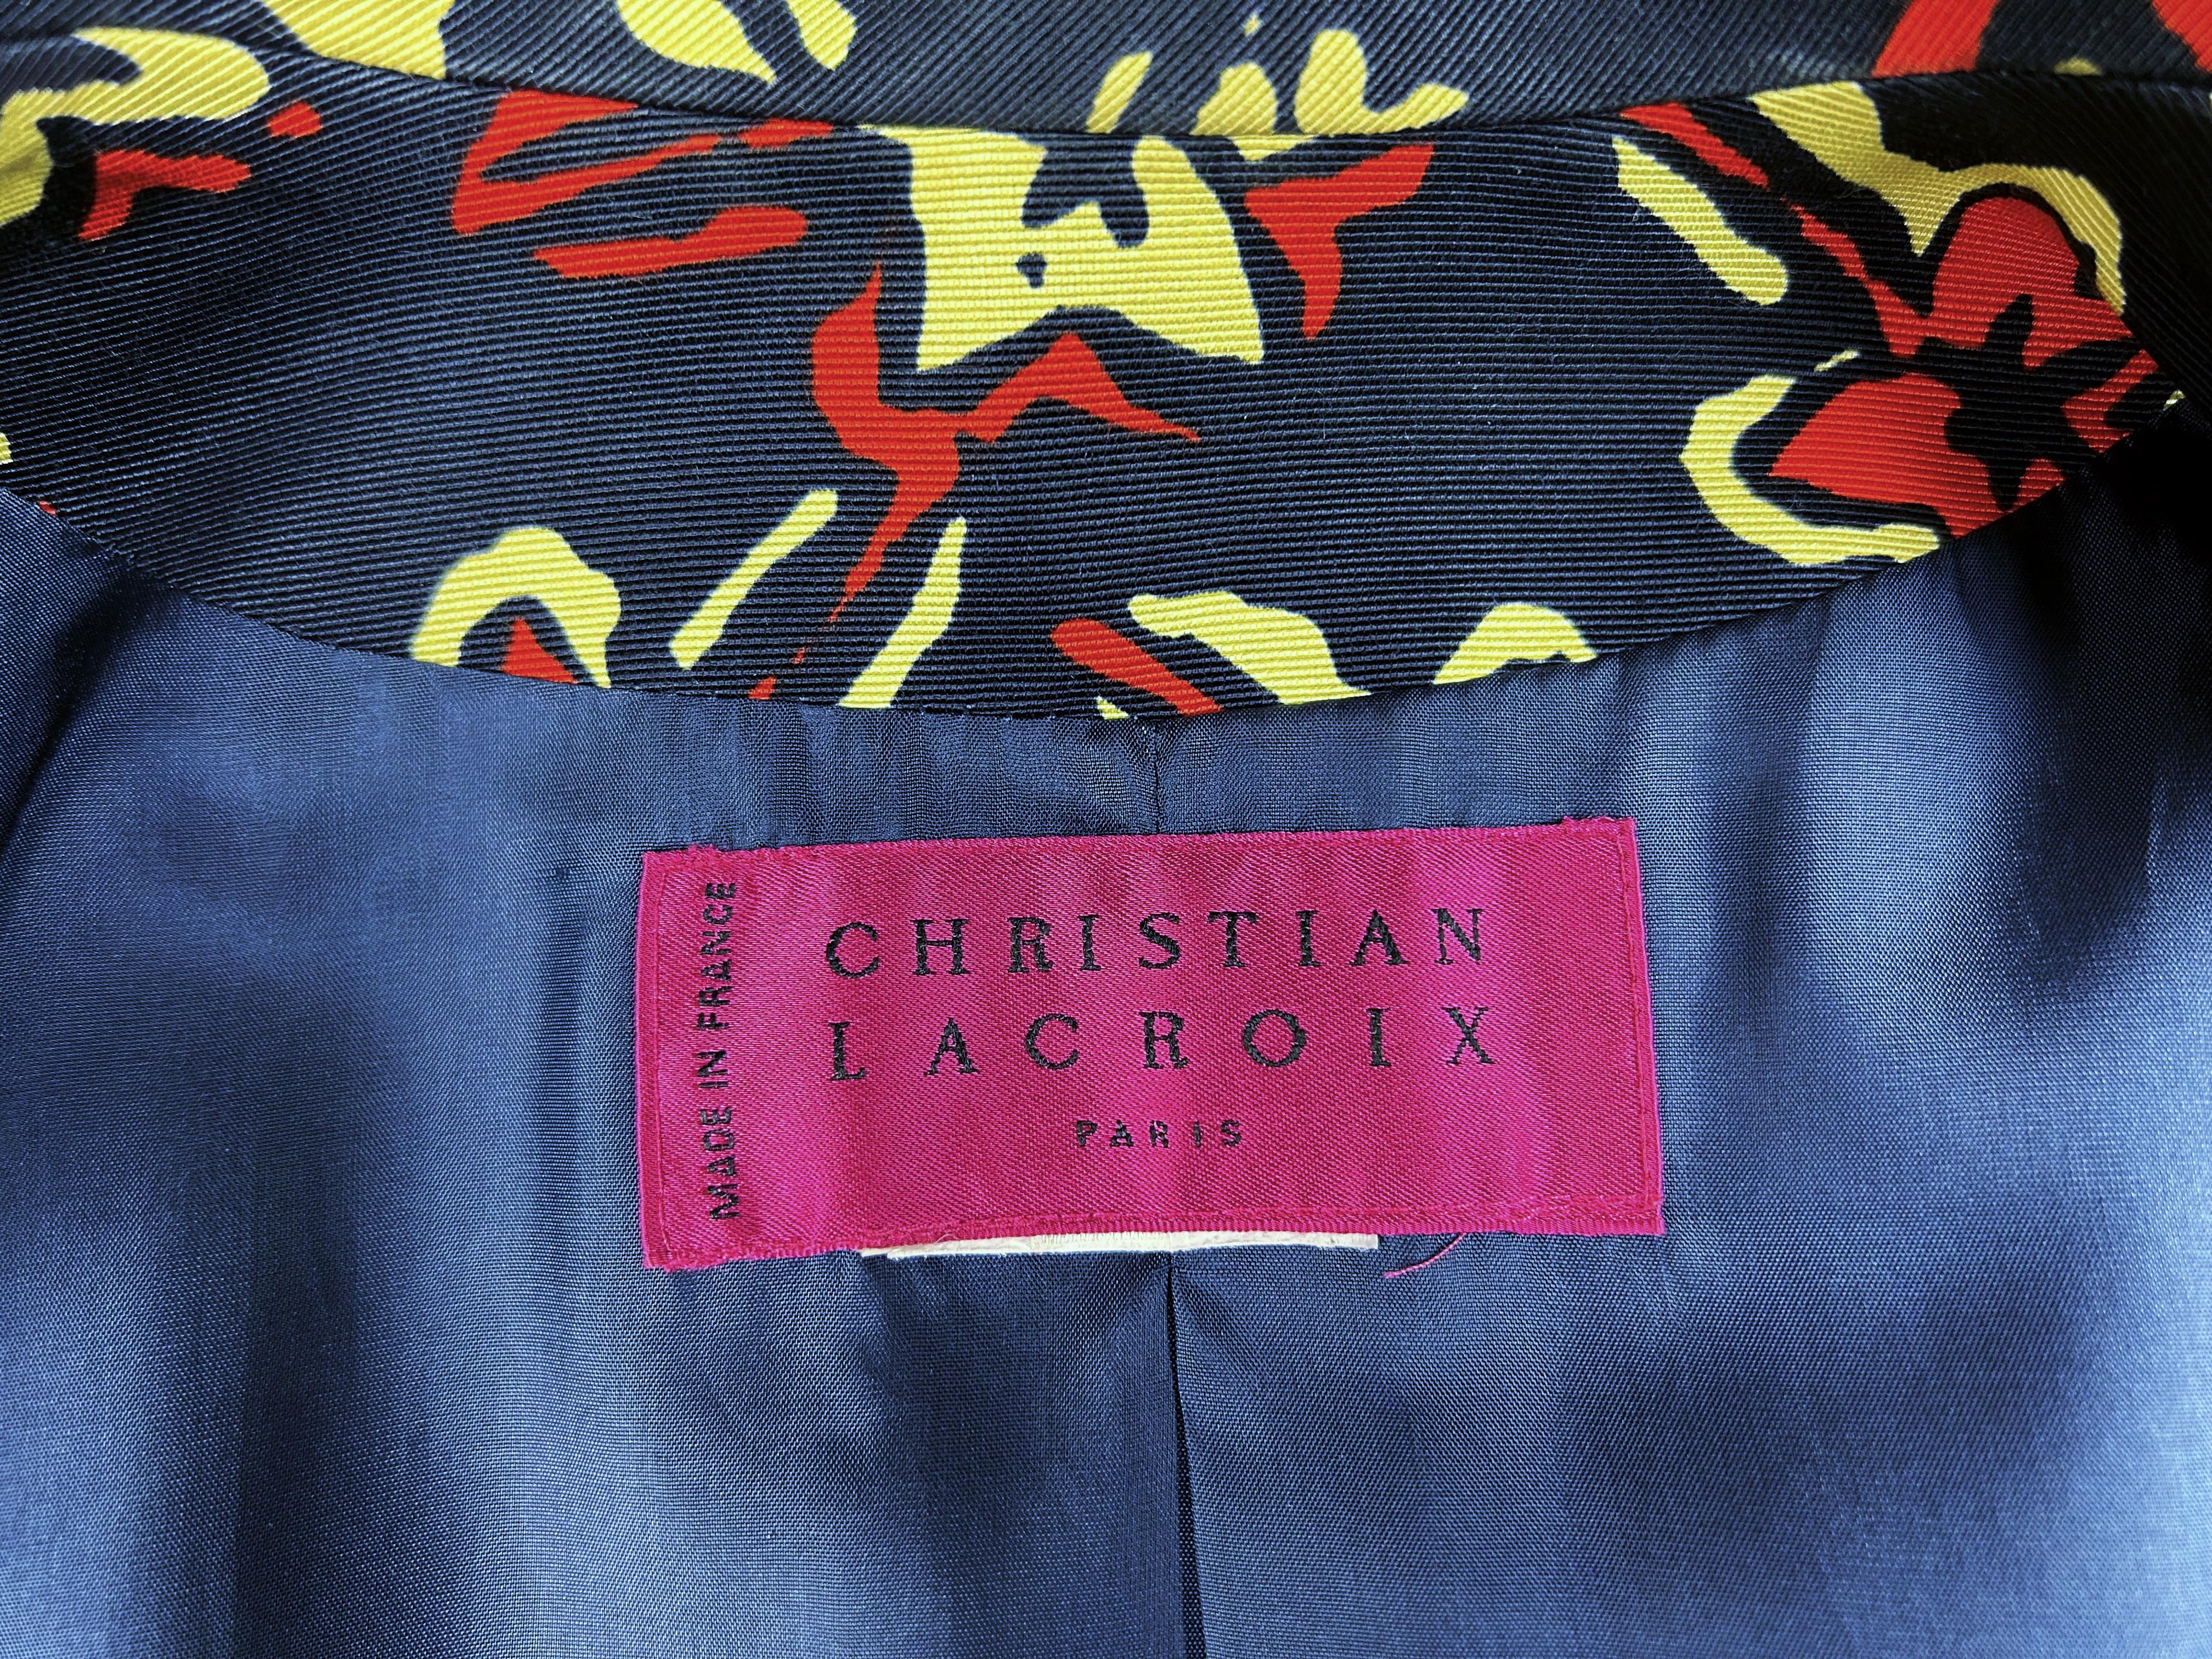 Circa 2000

France

Beautiful fluted silk faille jacket by Christian Lacroix dating from 2000. Fitted, shouldered jacket with fold-down collar and large navy blue and red button fastening at the front and echo at the cuffs. Printed silk ottoman with